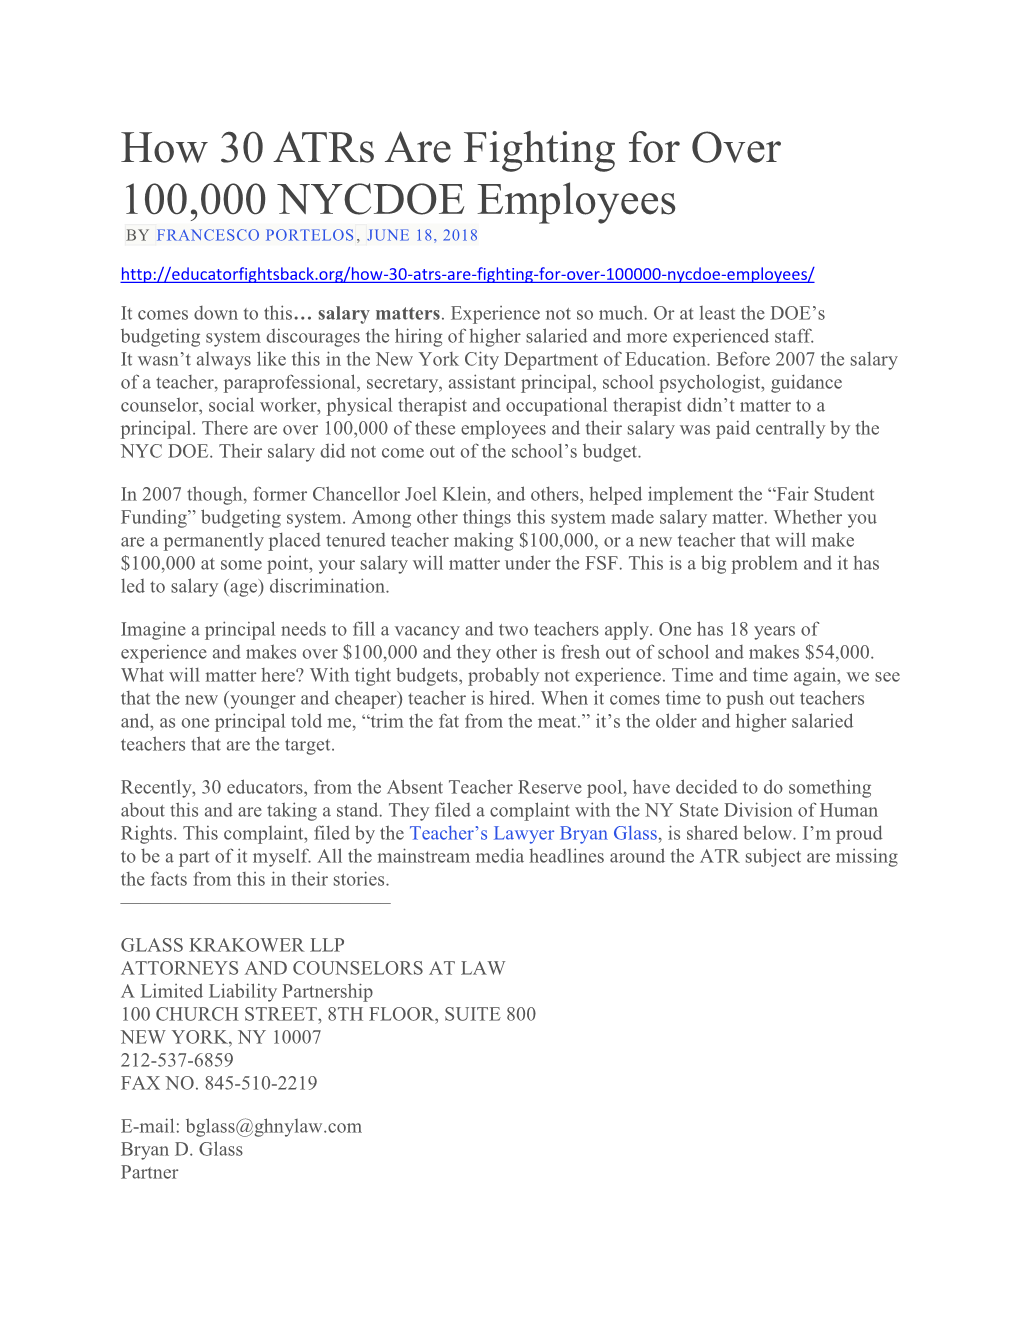 How 30 Atrs Are Fighting for Over 100,000 NYCDOE Employees by FRANCESCO PORTELOS, JUNE 18, 2018